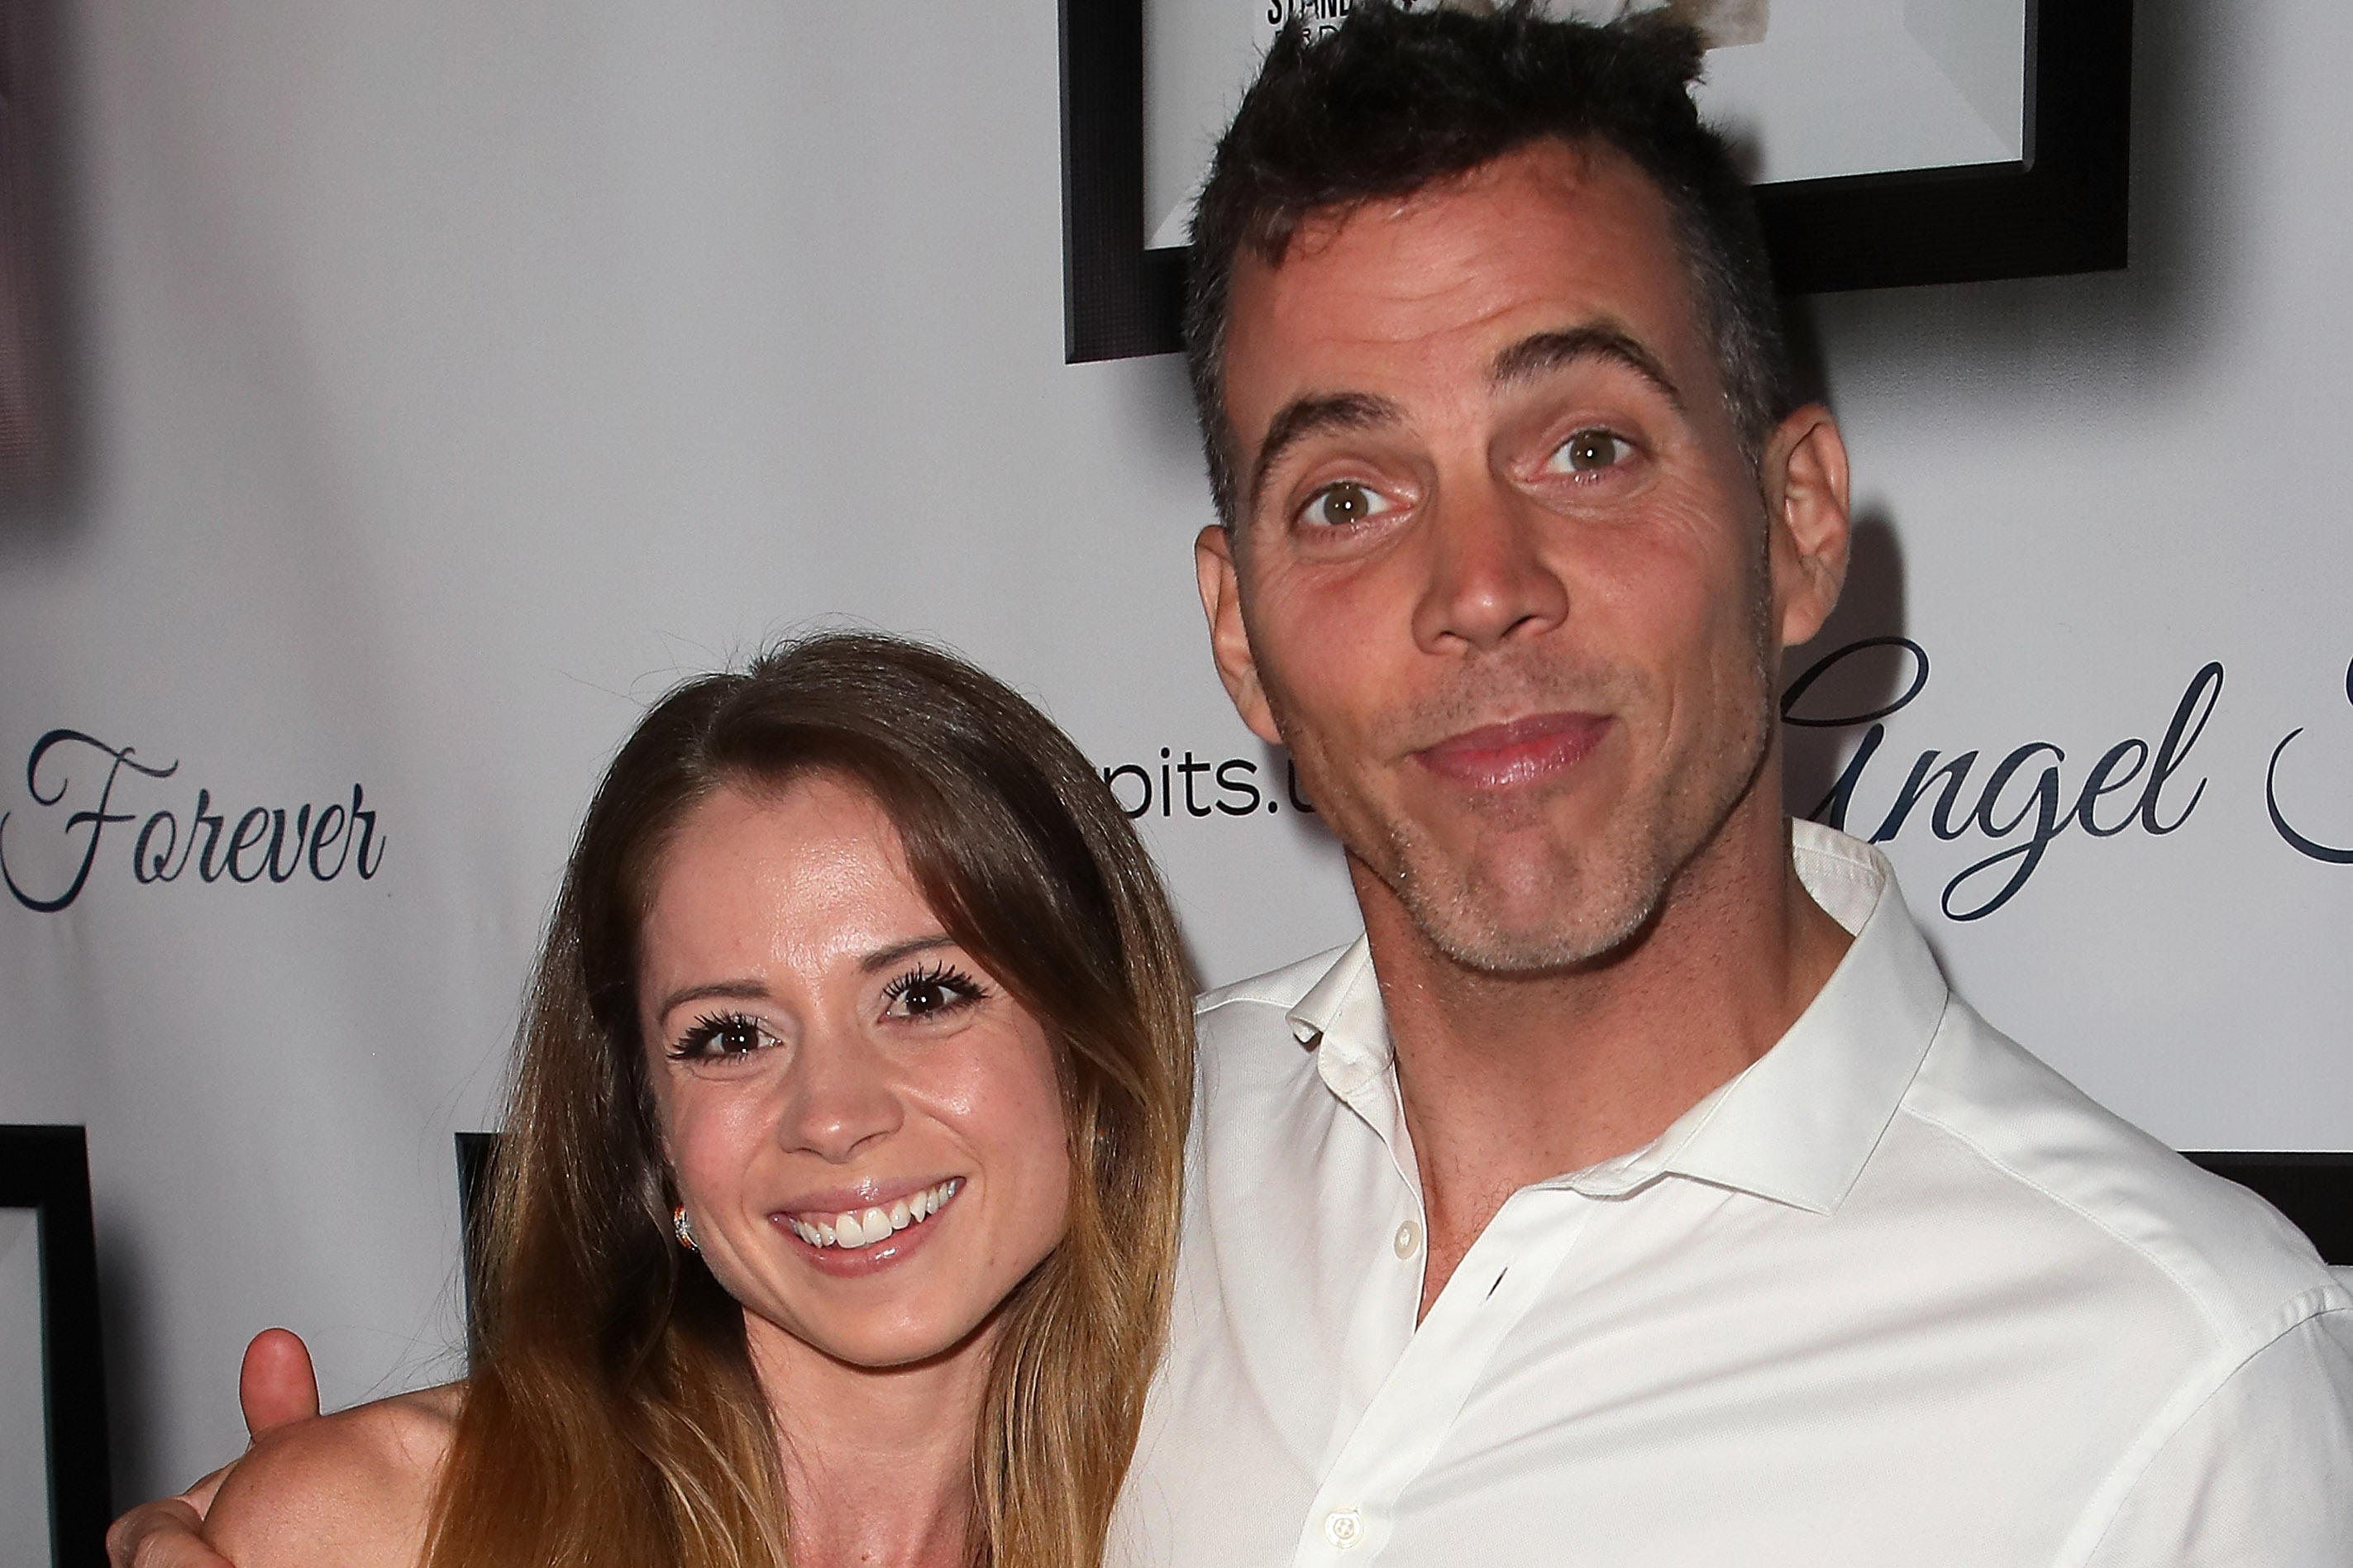 diane sines recommends steve o girlfriend pic